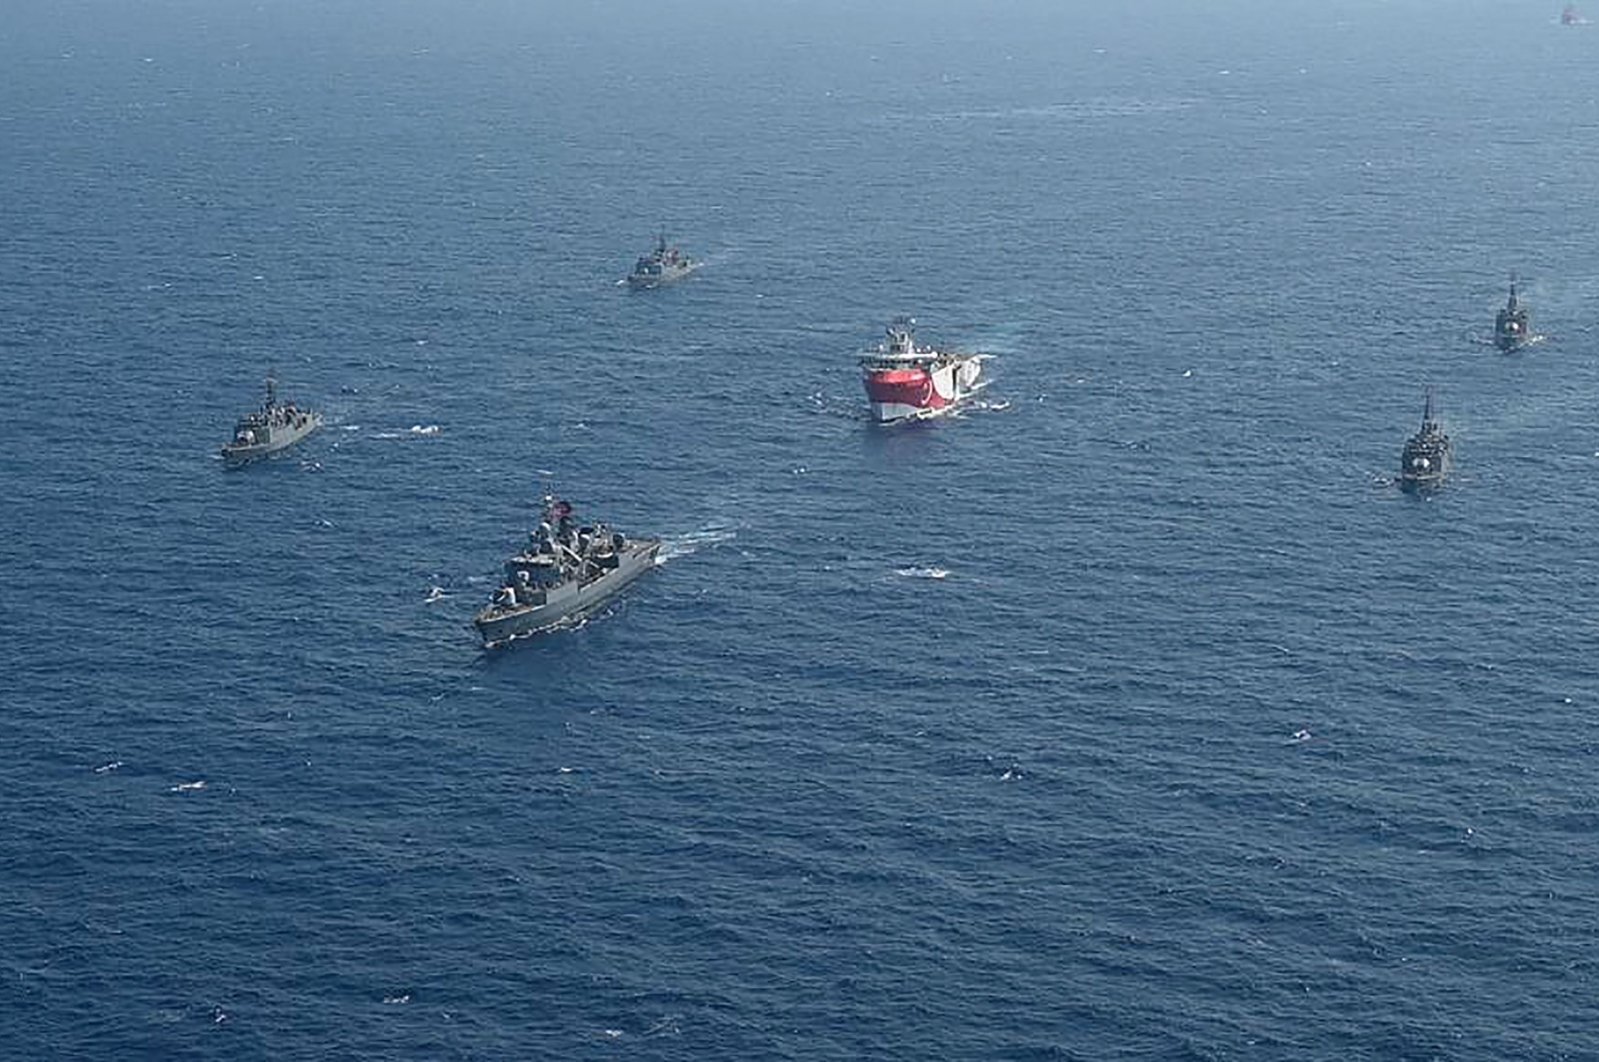 The Turkish seismic research vessel Oruç Reis is escorted by Turkish naval ships in the Mediterranean Sea off Antalya, Turkey, Aug. 10, 2020. (AFP Photo)